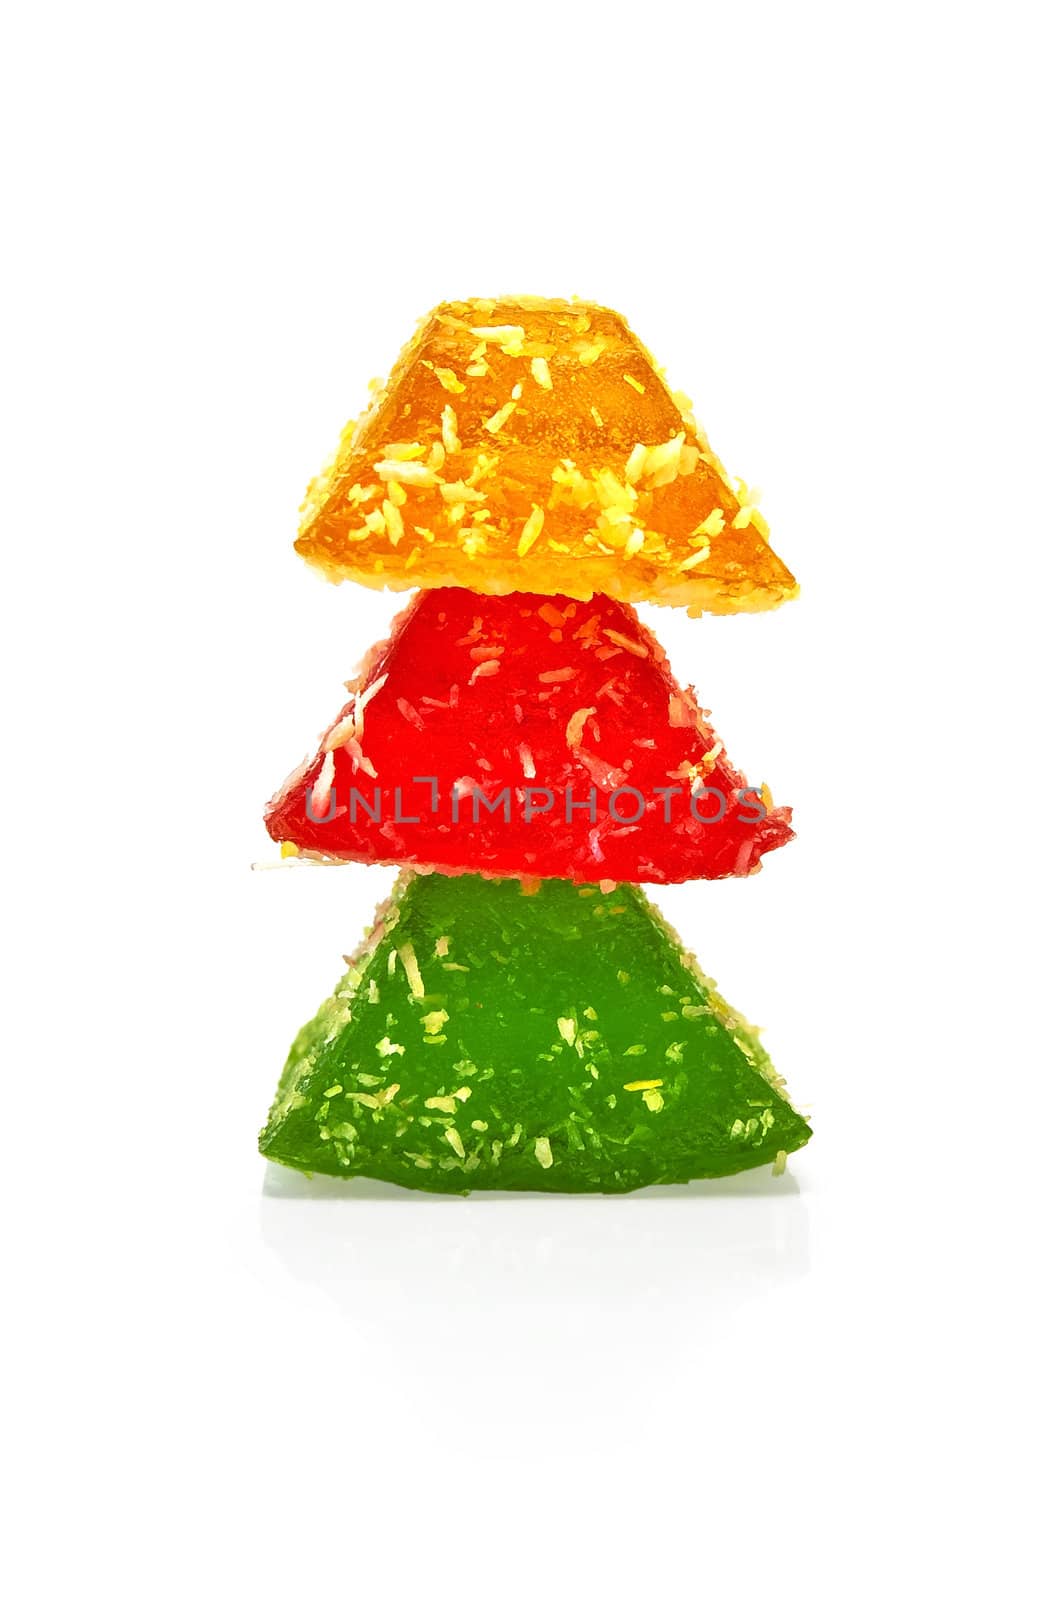 Three marmalade of red, green and yellow, folded on each other is isolated on a white background